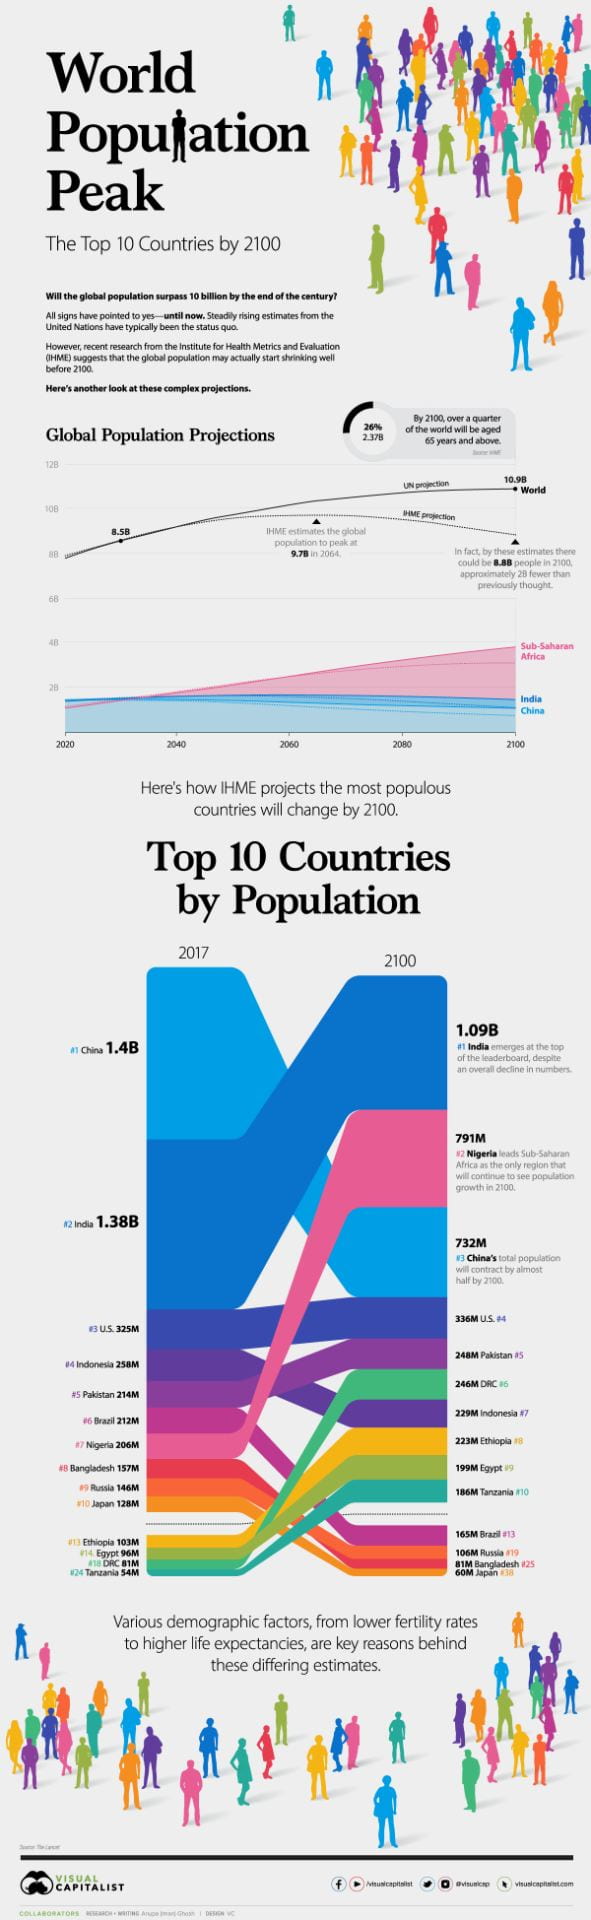 Which Is 'The Best Country In The World'? [Infographic]